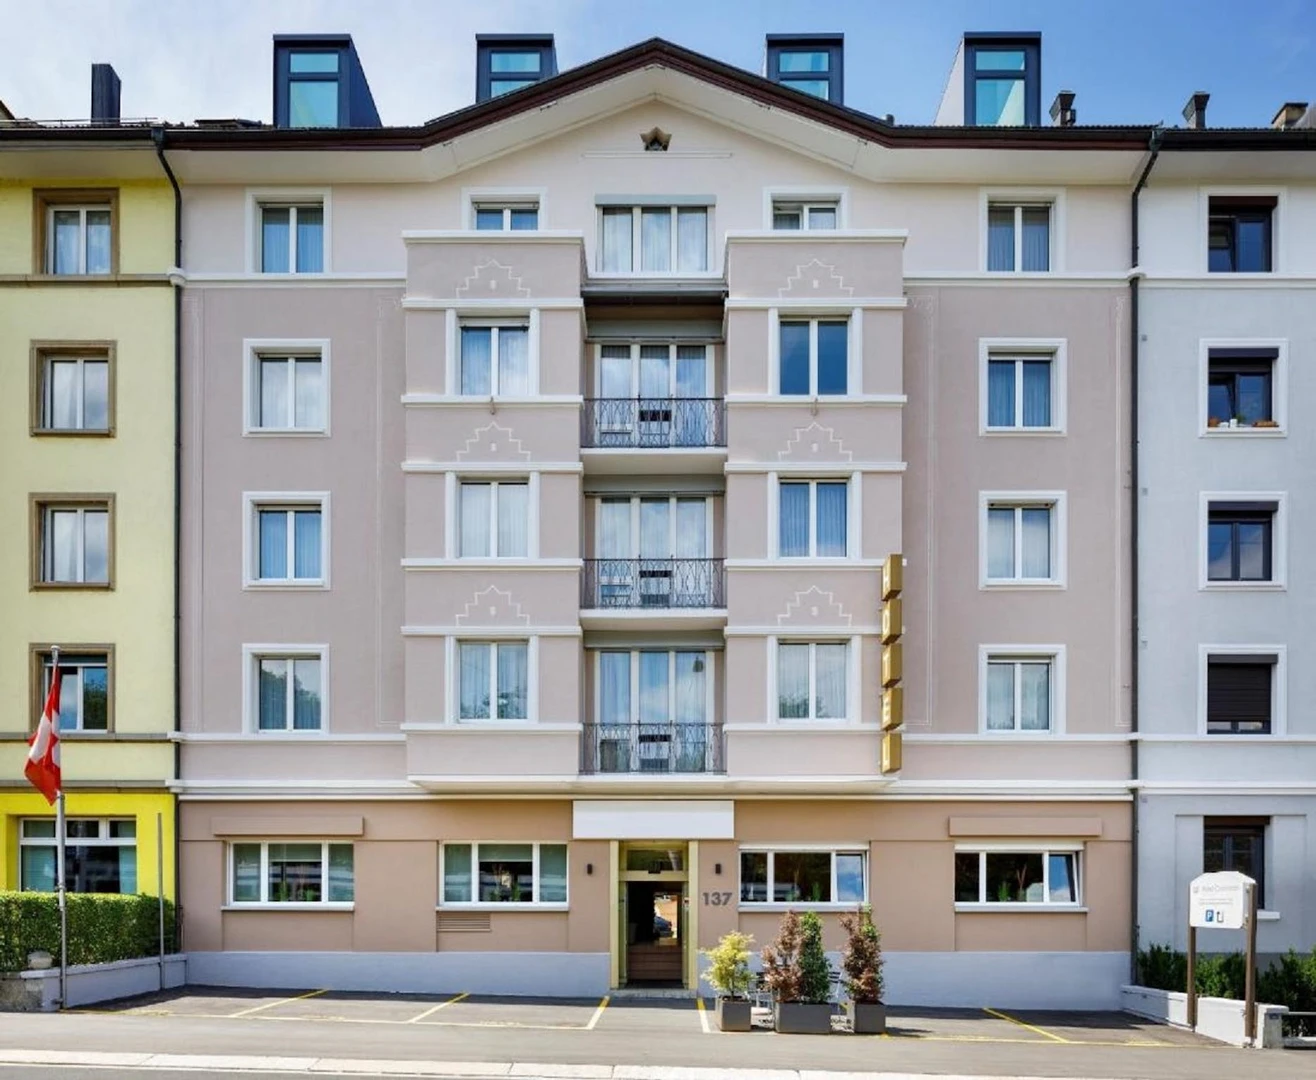 Accommodation with 3 bedrooms in Zurich